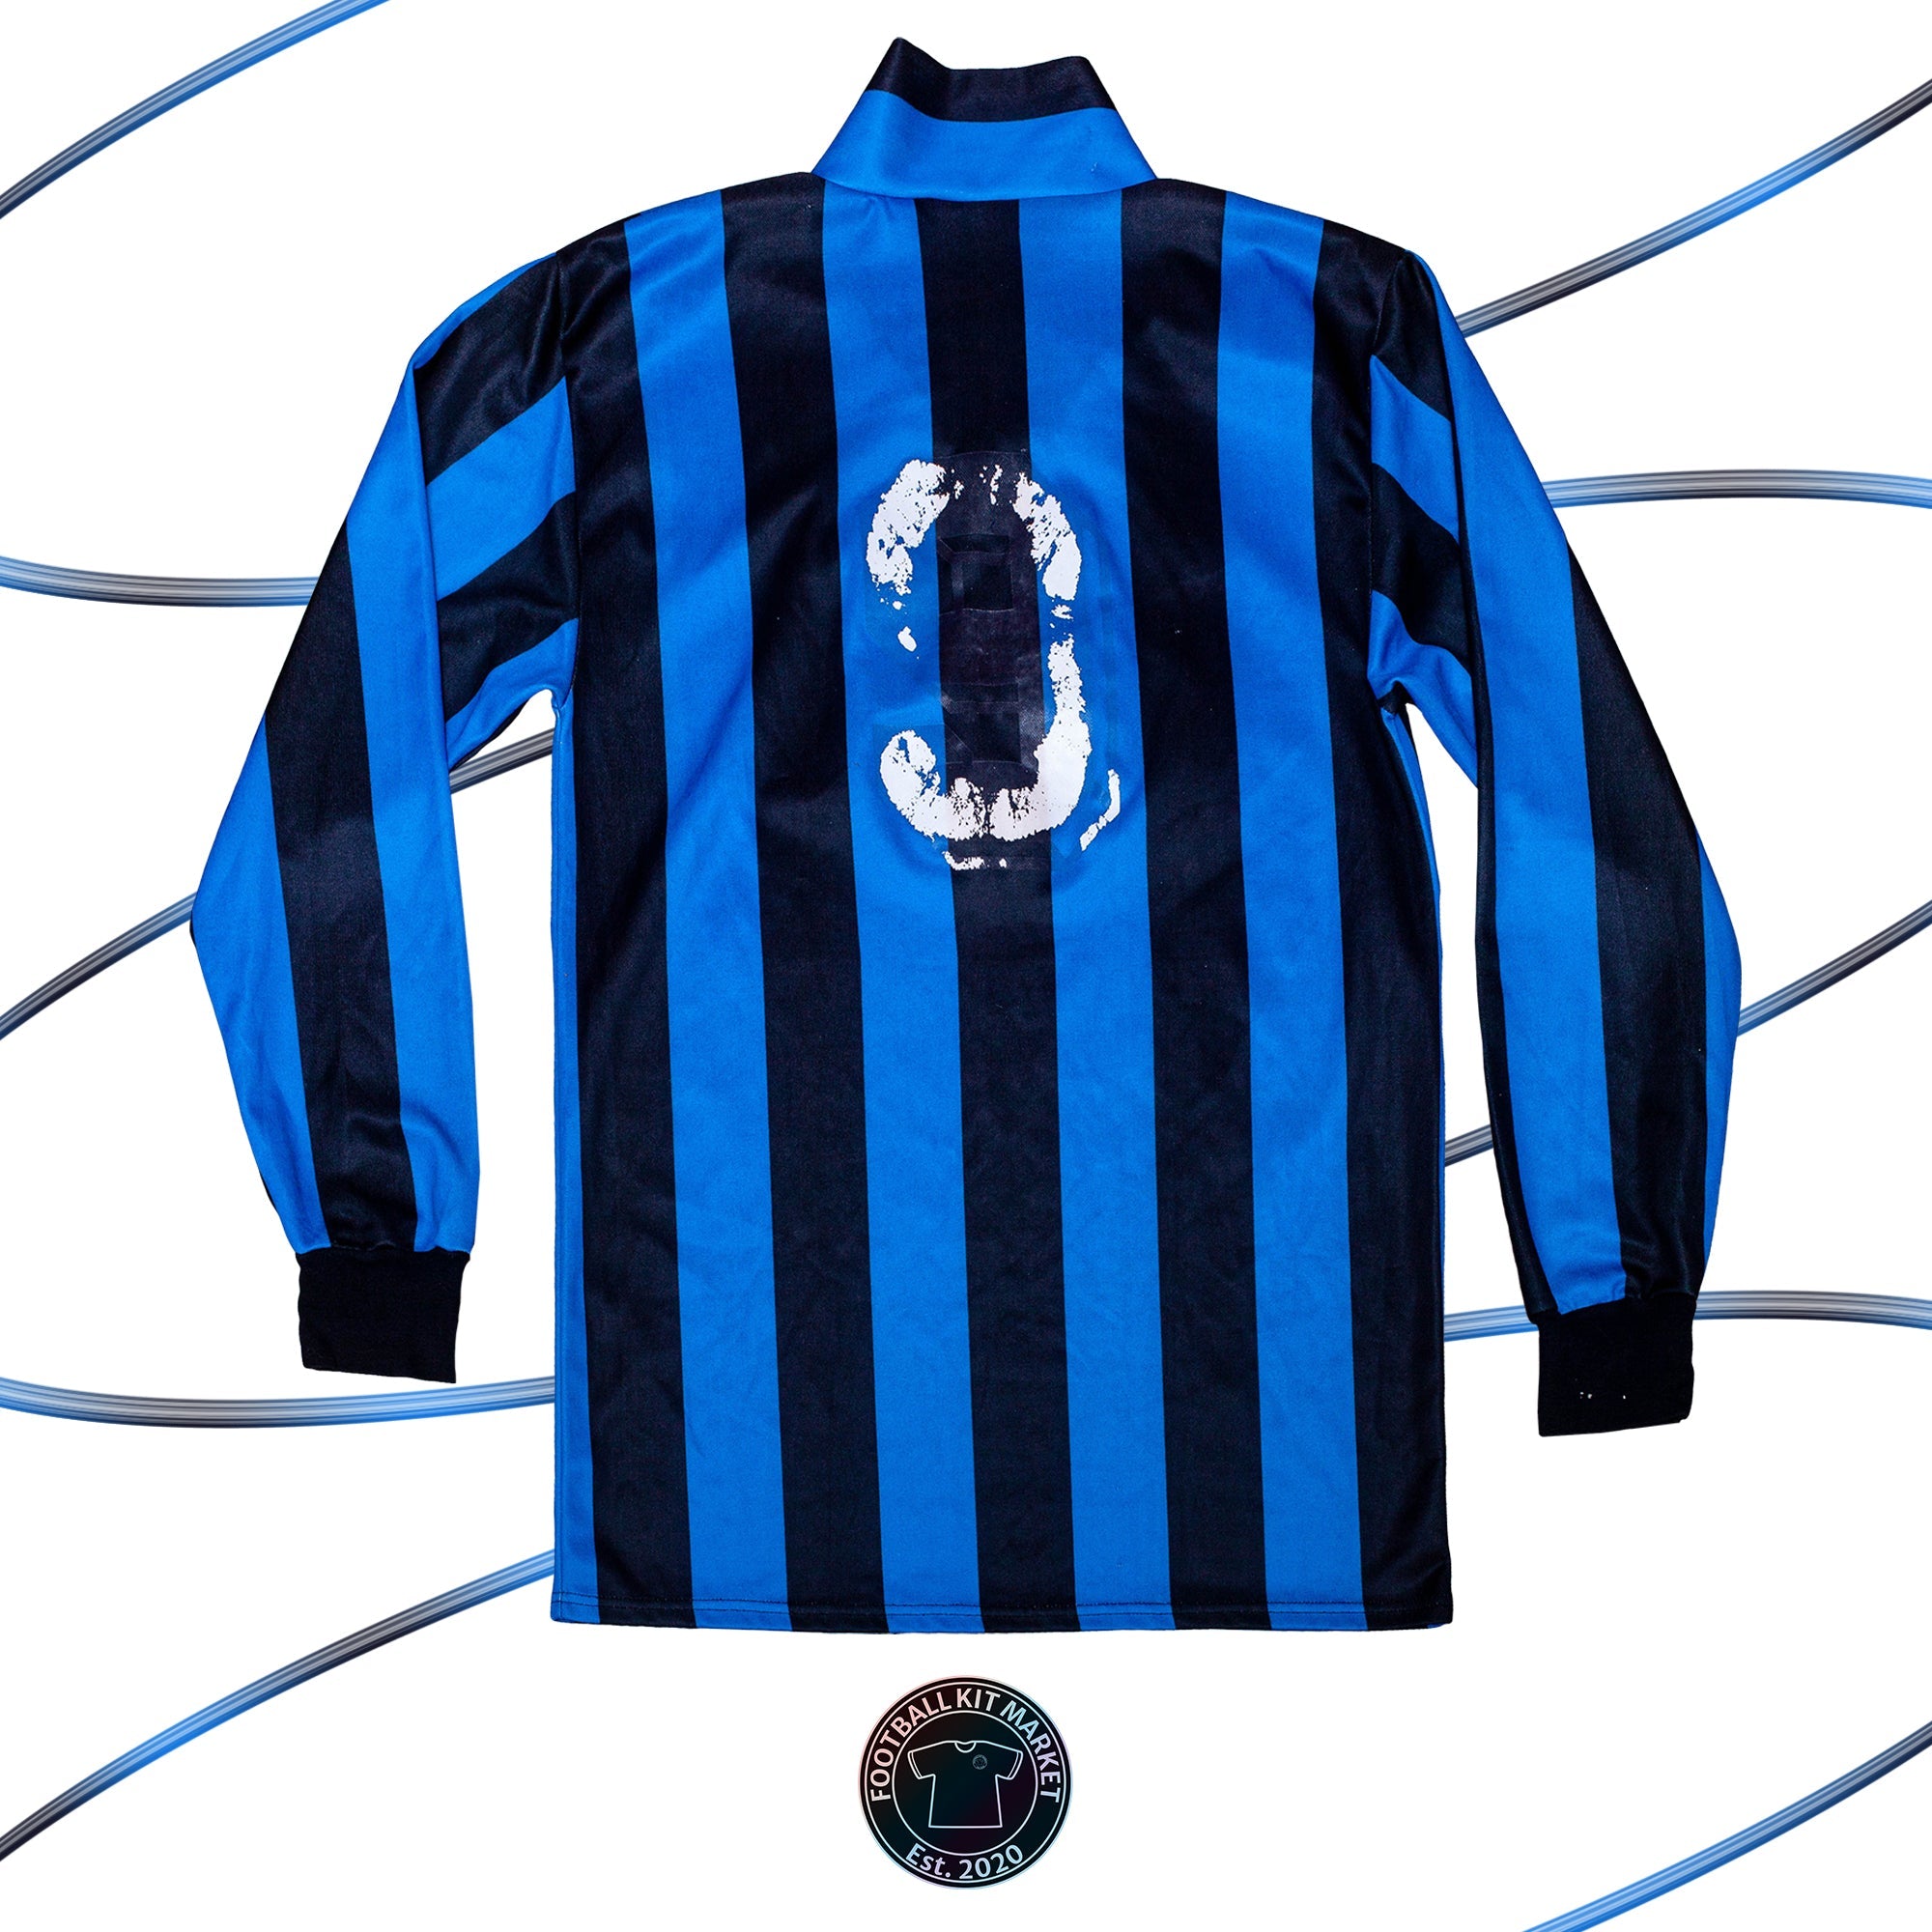 Genuine INTER MILAN Home (1990-1991) - UHLSPORT (L) - Product Image from Football Kit Market